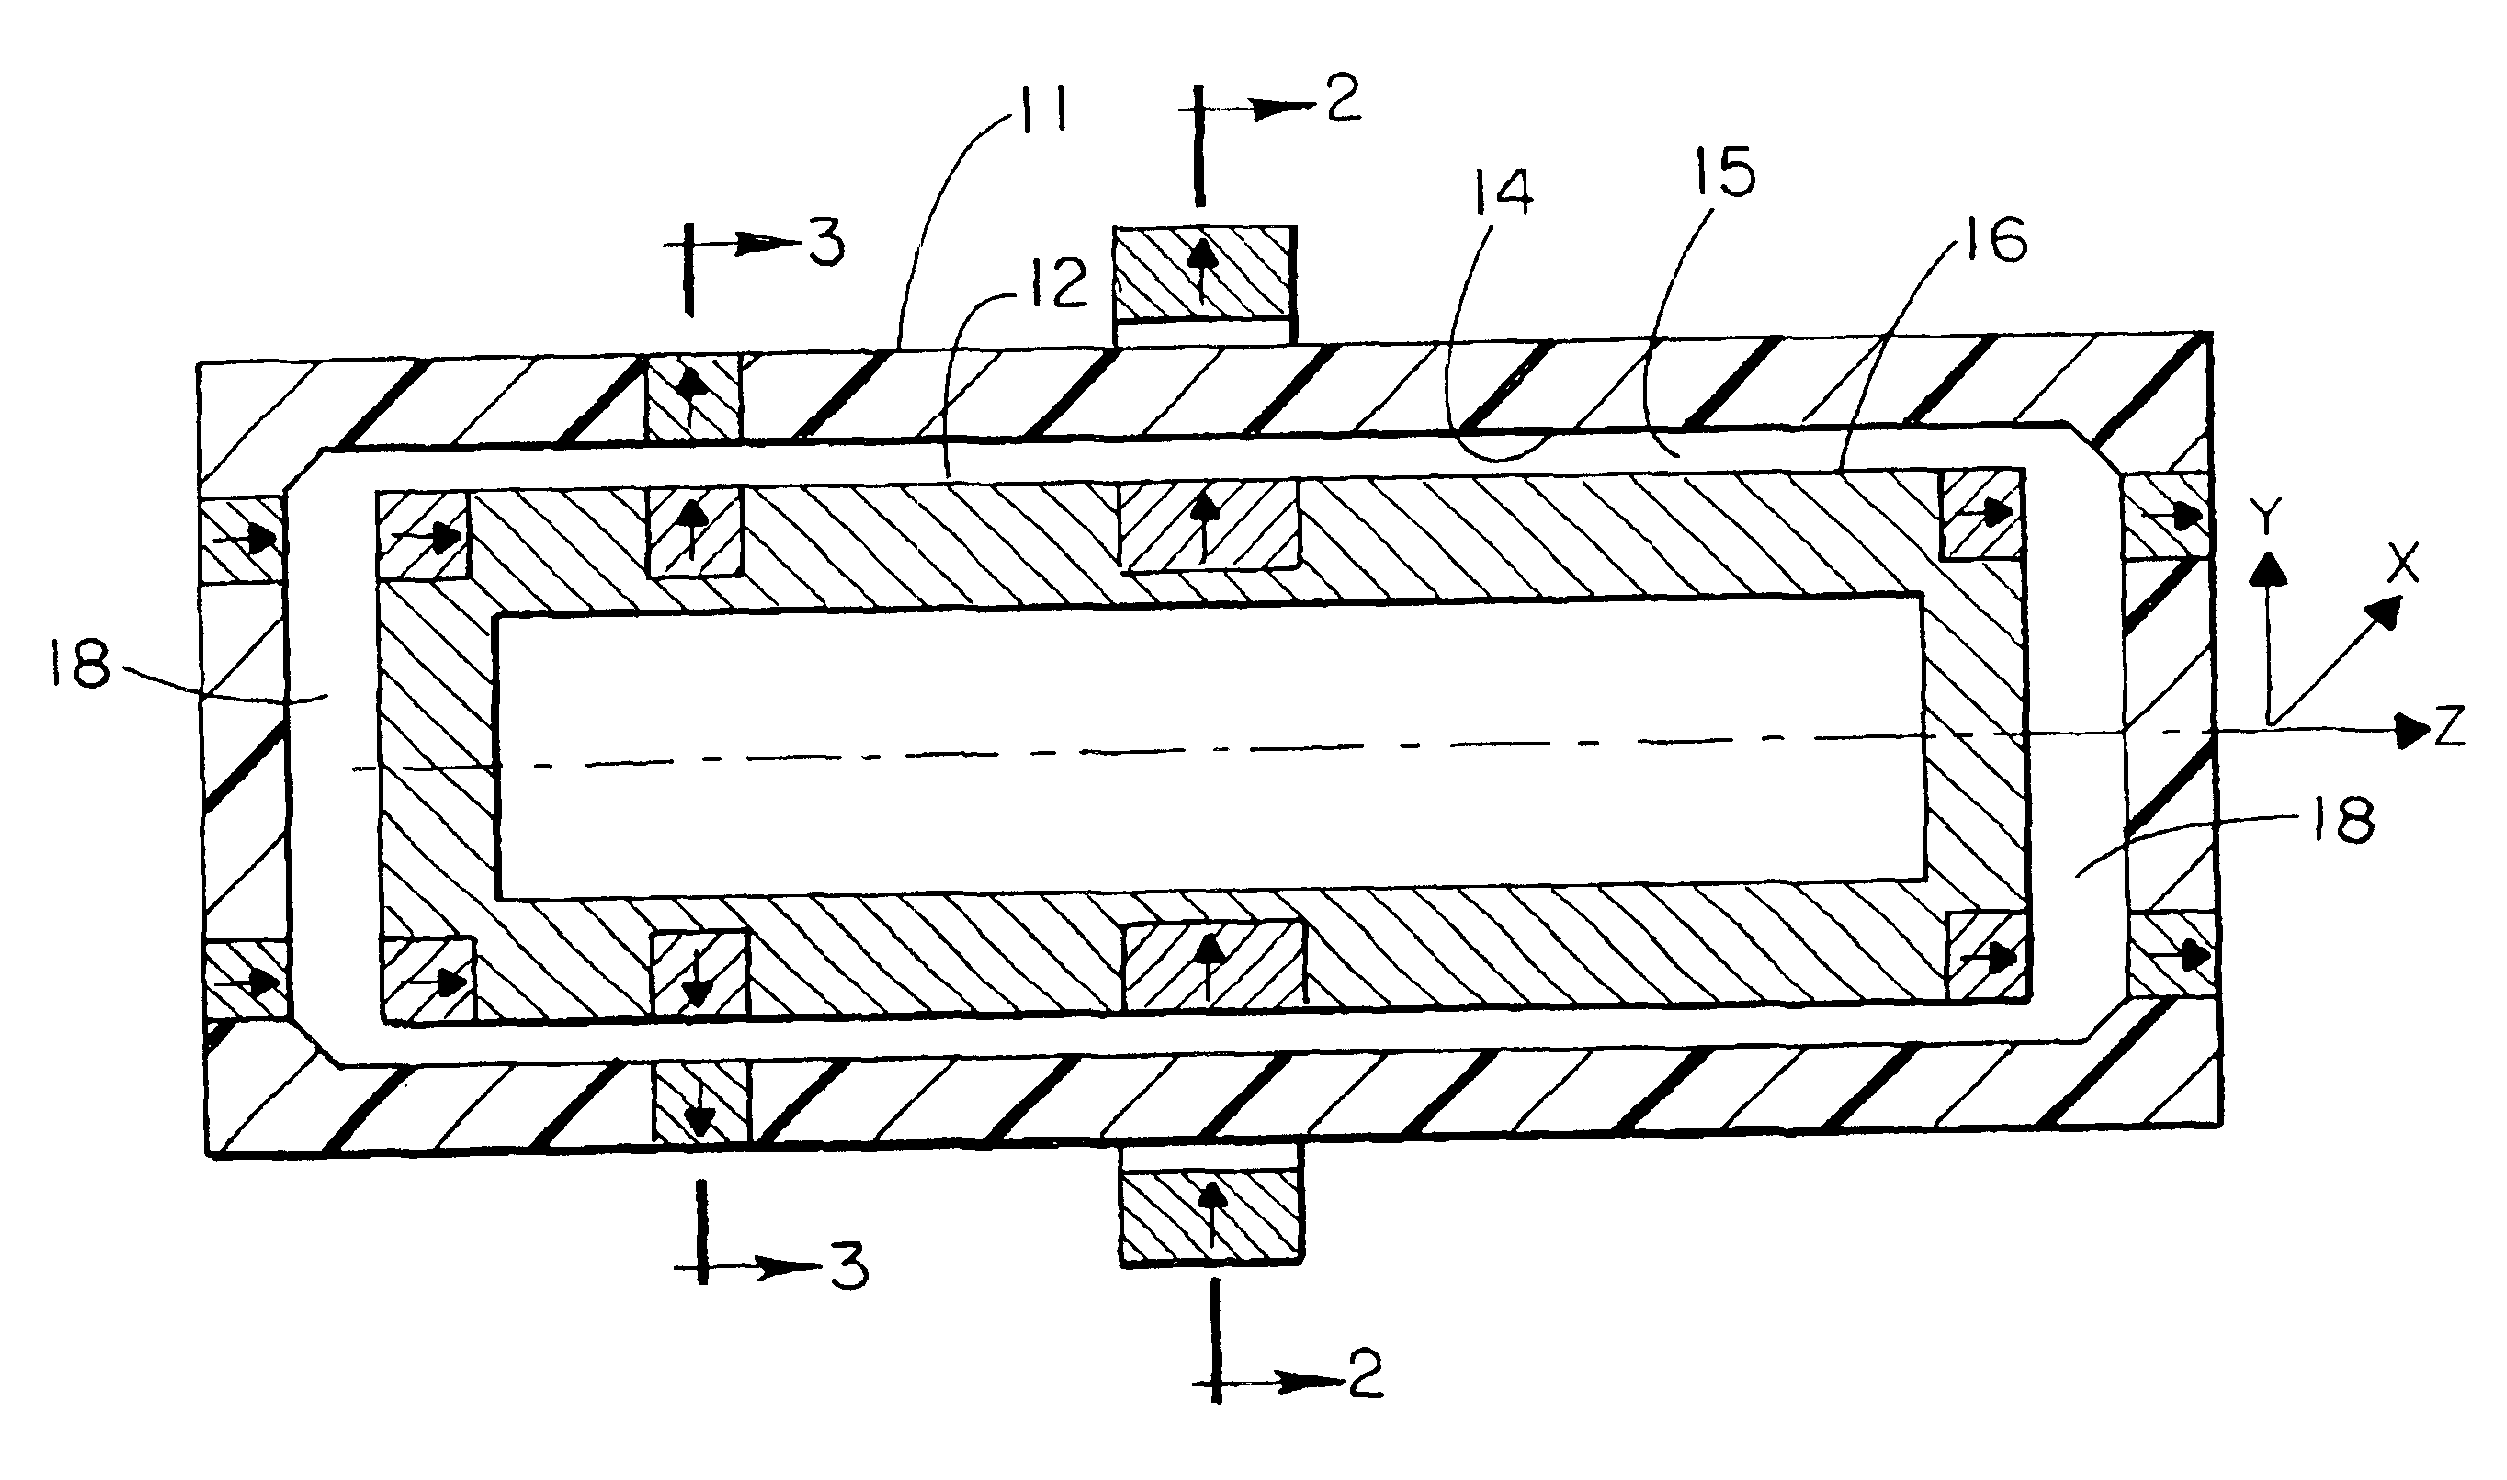 System for passive and stable suspension of a rotor in rotor/stator assemblies